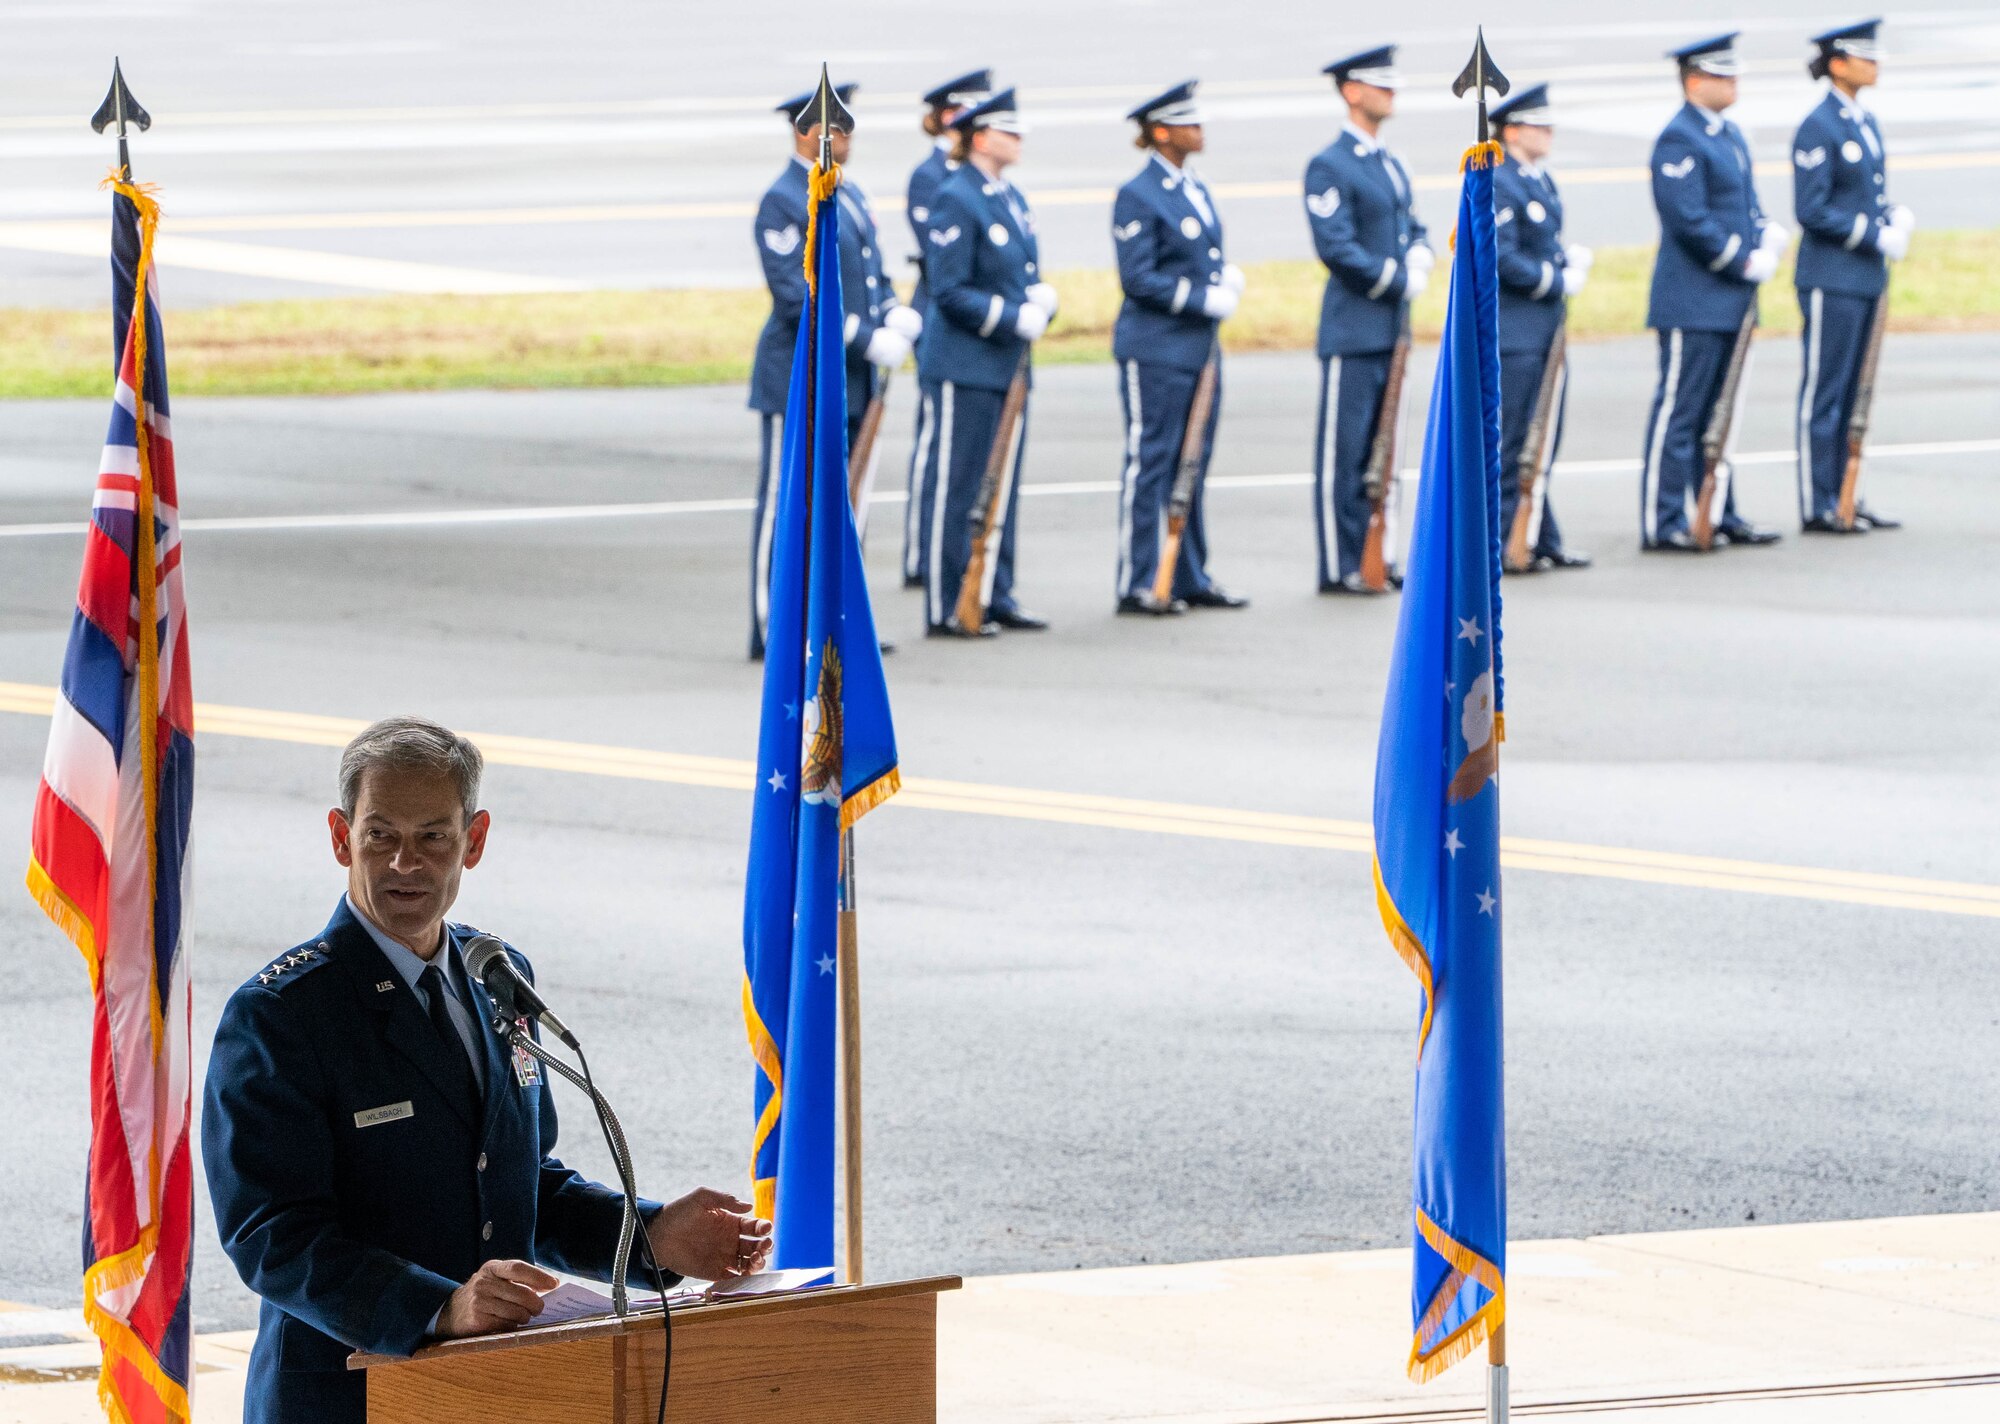 Gen. Ken Wilsbach, PACAF commander, speaks at the December 7th Remembrance Ceremony at Joint Base Pearl Harbor-Hickam, Hawaii, Dec. 7, 2021. The 80th Remembrance Ceremony honors those who survived and those who paid the ultimate sacrifice during the attack on Hickam Field. (U.S Air Force photo by Airman 1st Class Makensie Cooper)